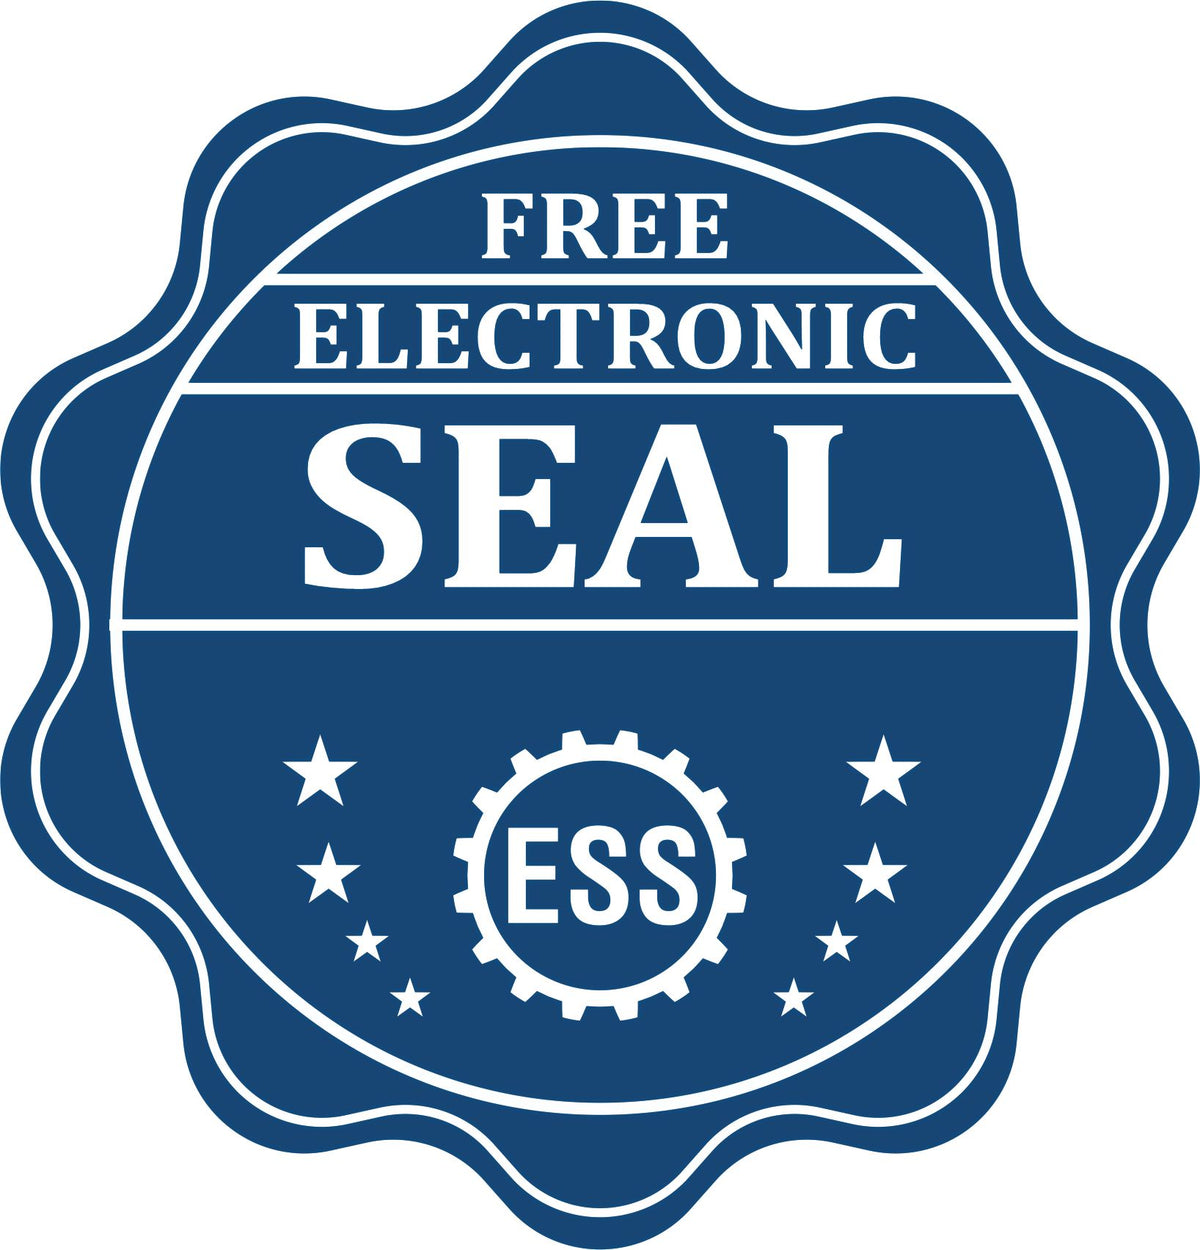 A badge showing a free electronic seal for the Gift West Virginia Landscape Architect Seal with stars and the ESS gear on the emblem.